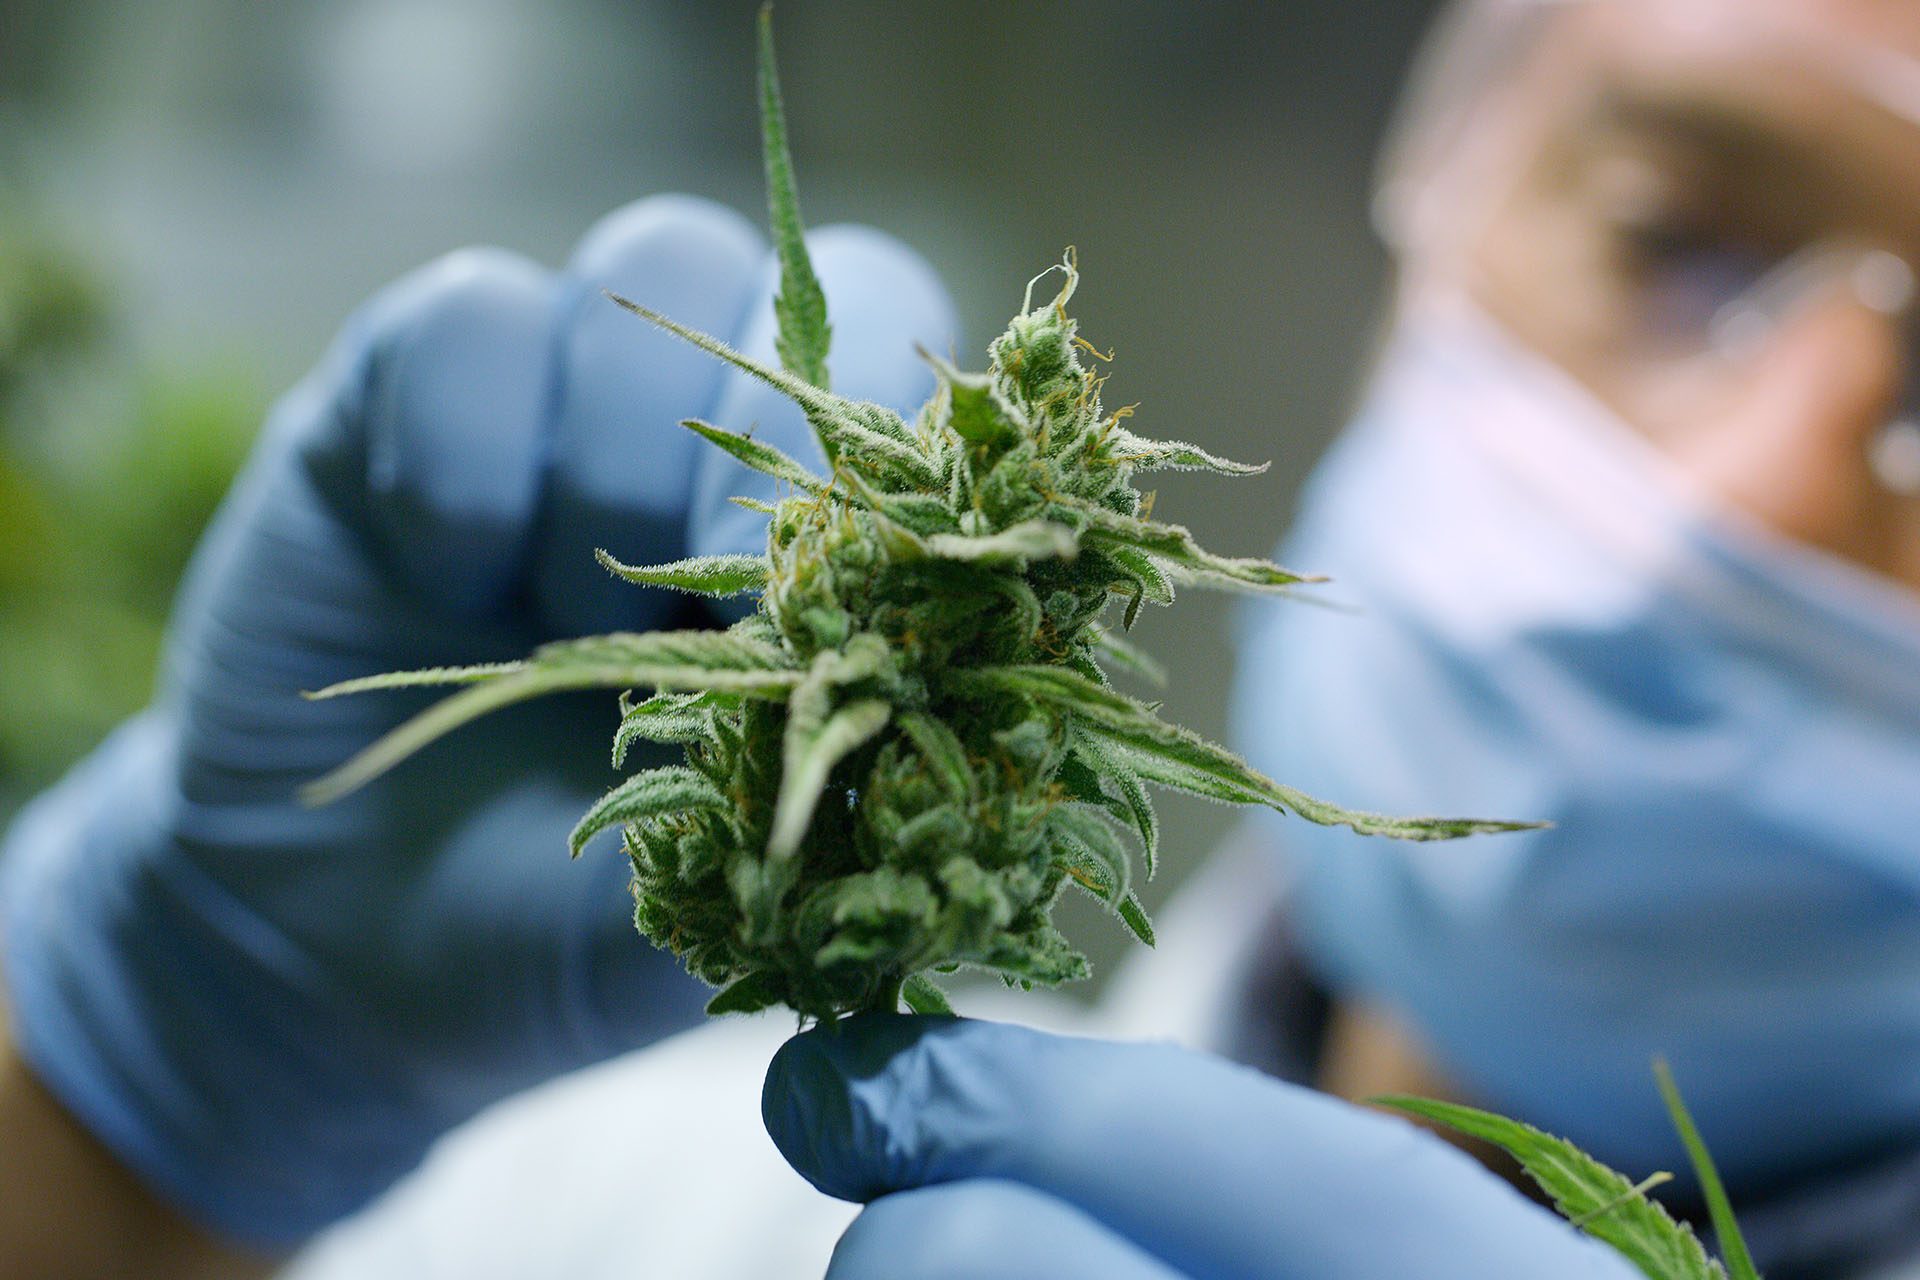 researcher examining cannabis bud ready for harvest